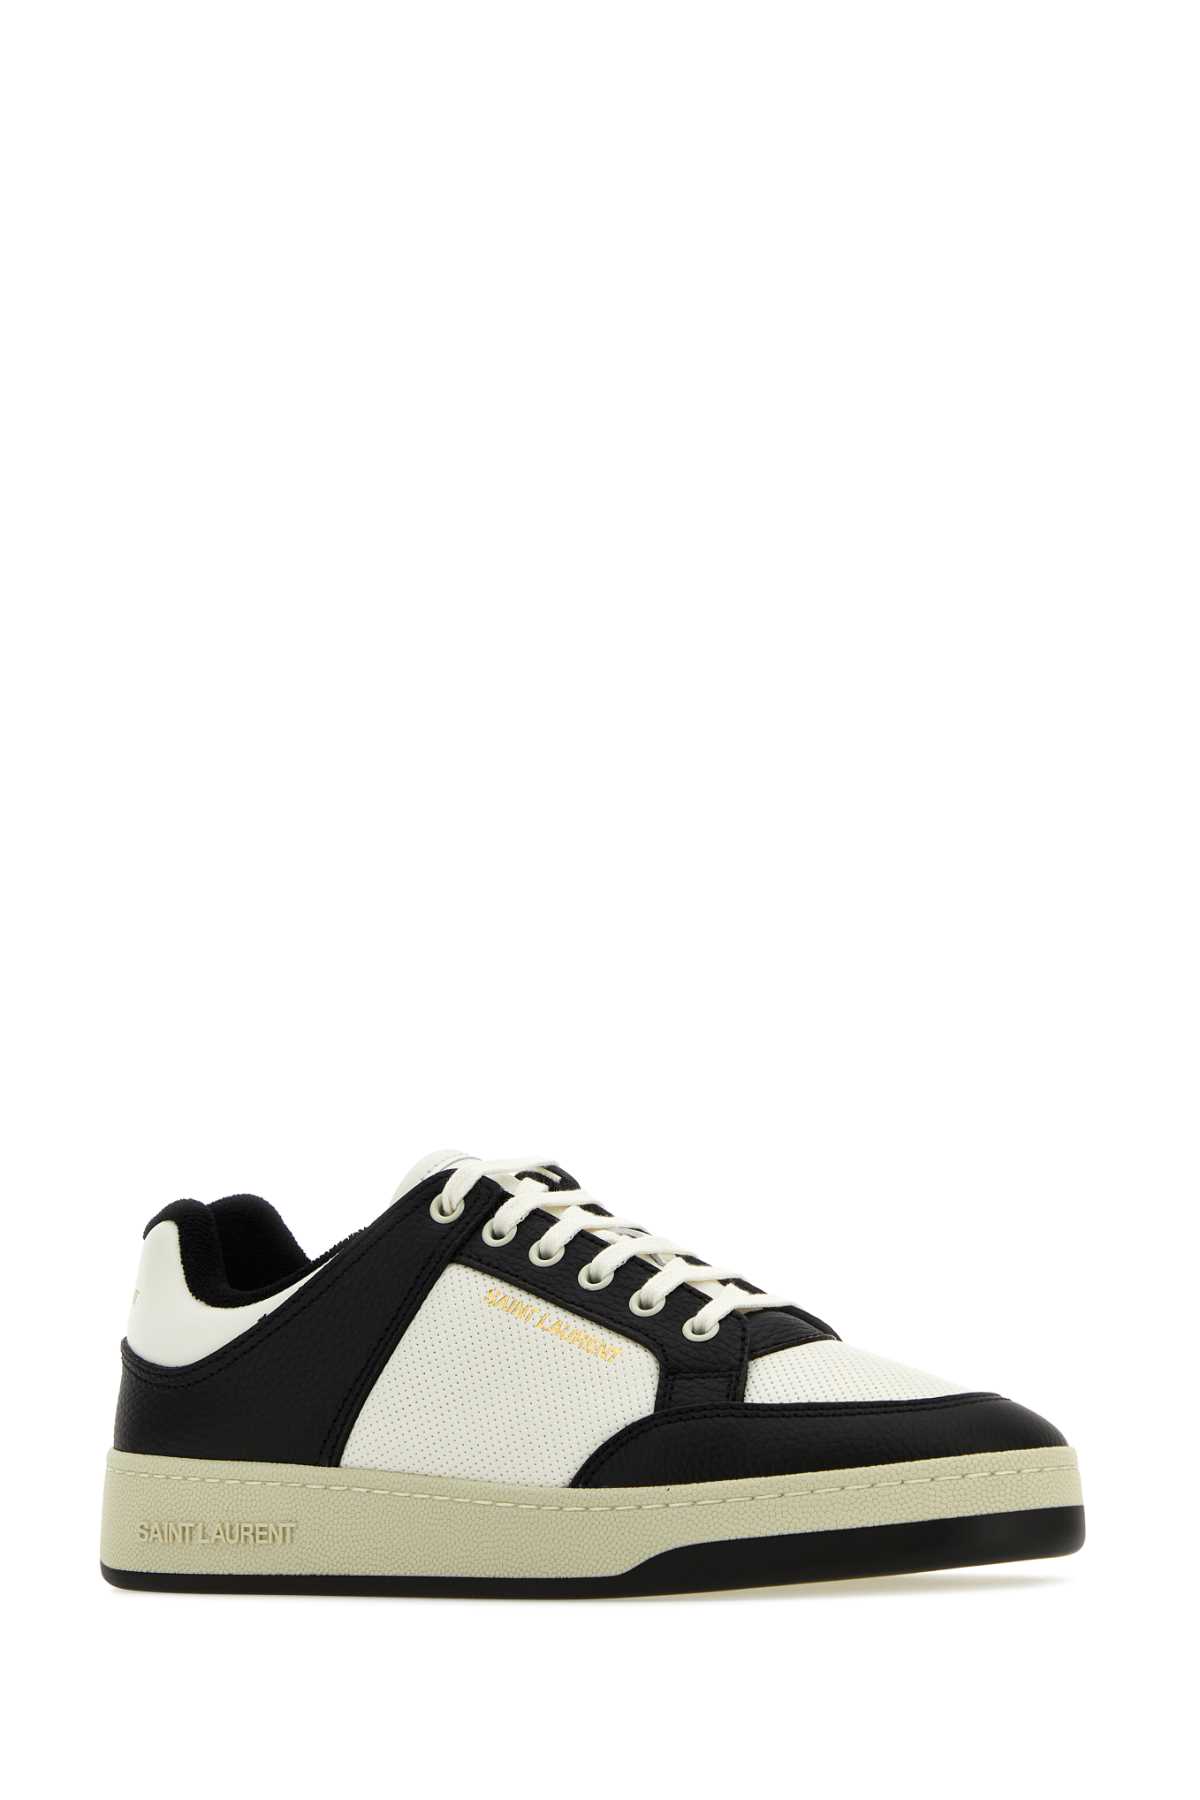 SAINT LAURENT TWO-TONE LEATHER SL/61 SNEAKERS